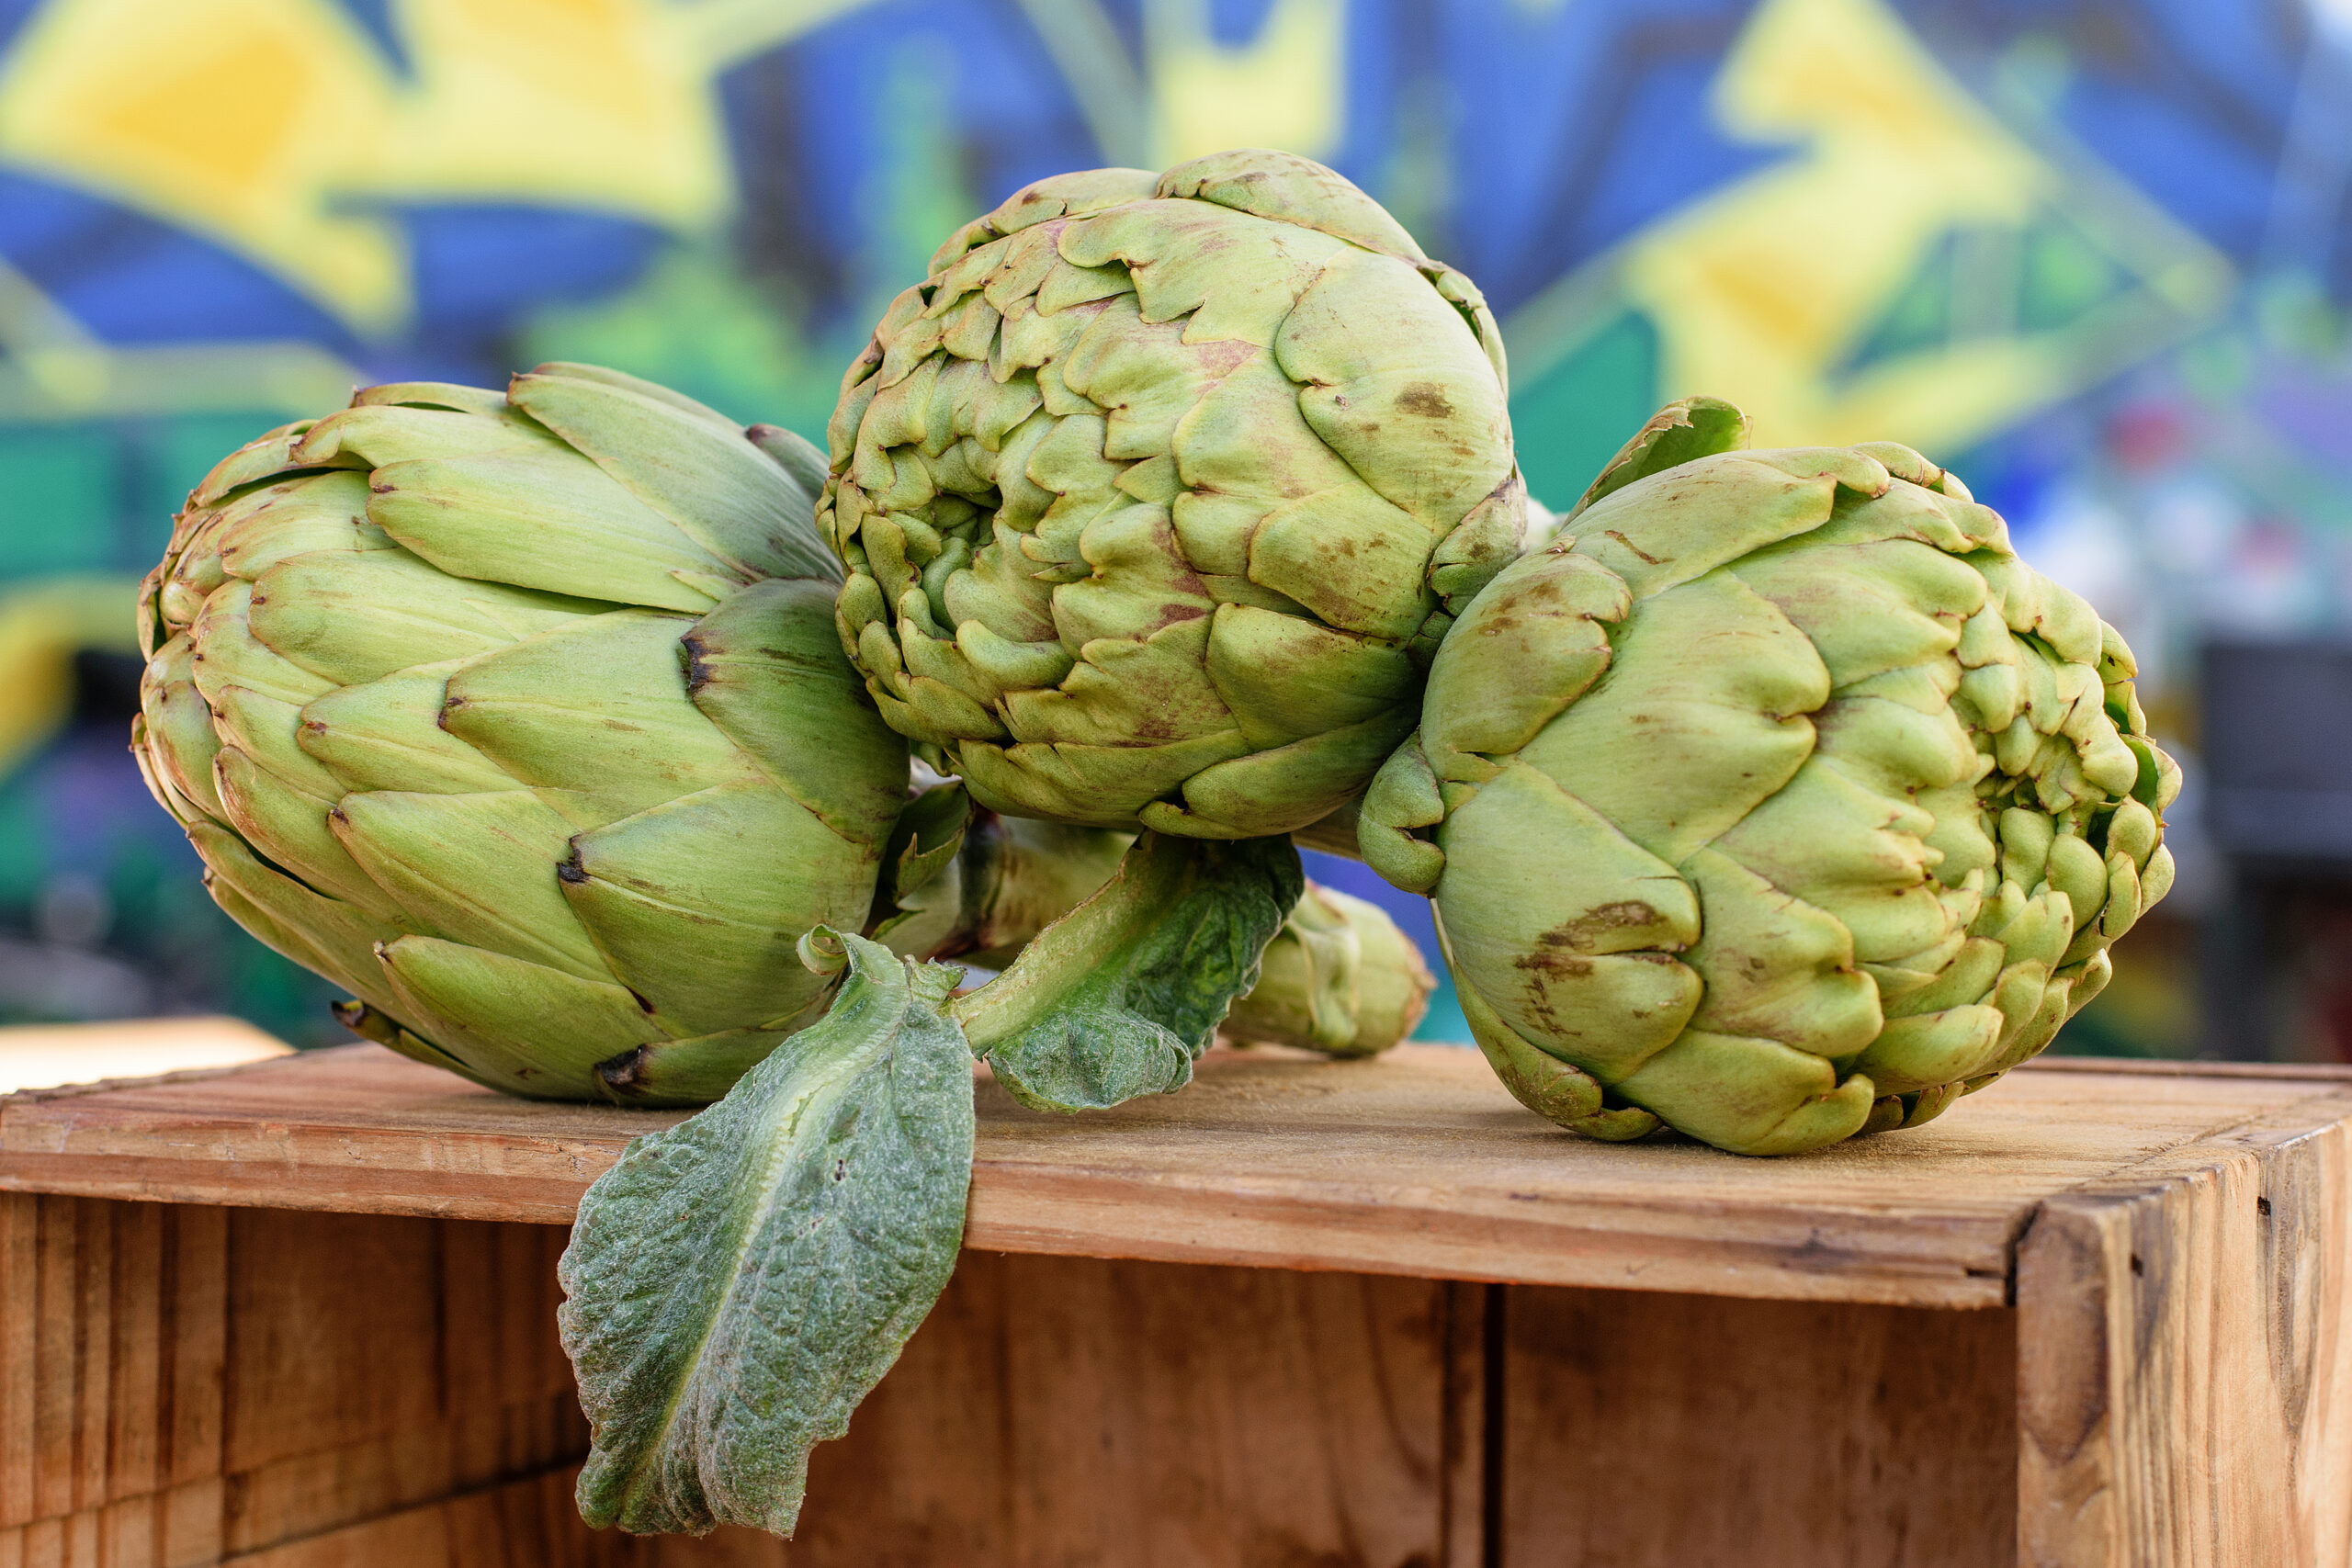 How To Cook Artichoke Boil